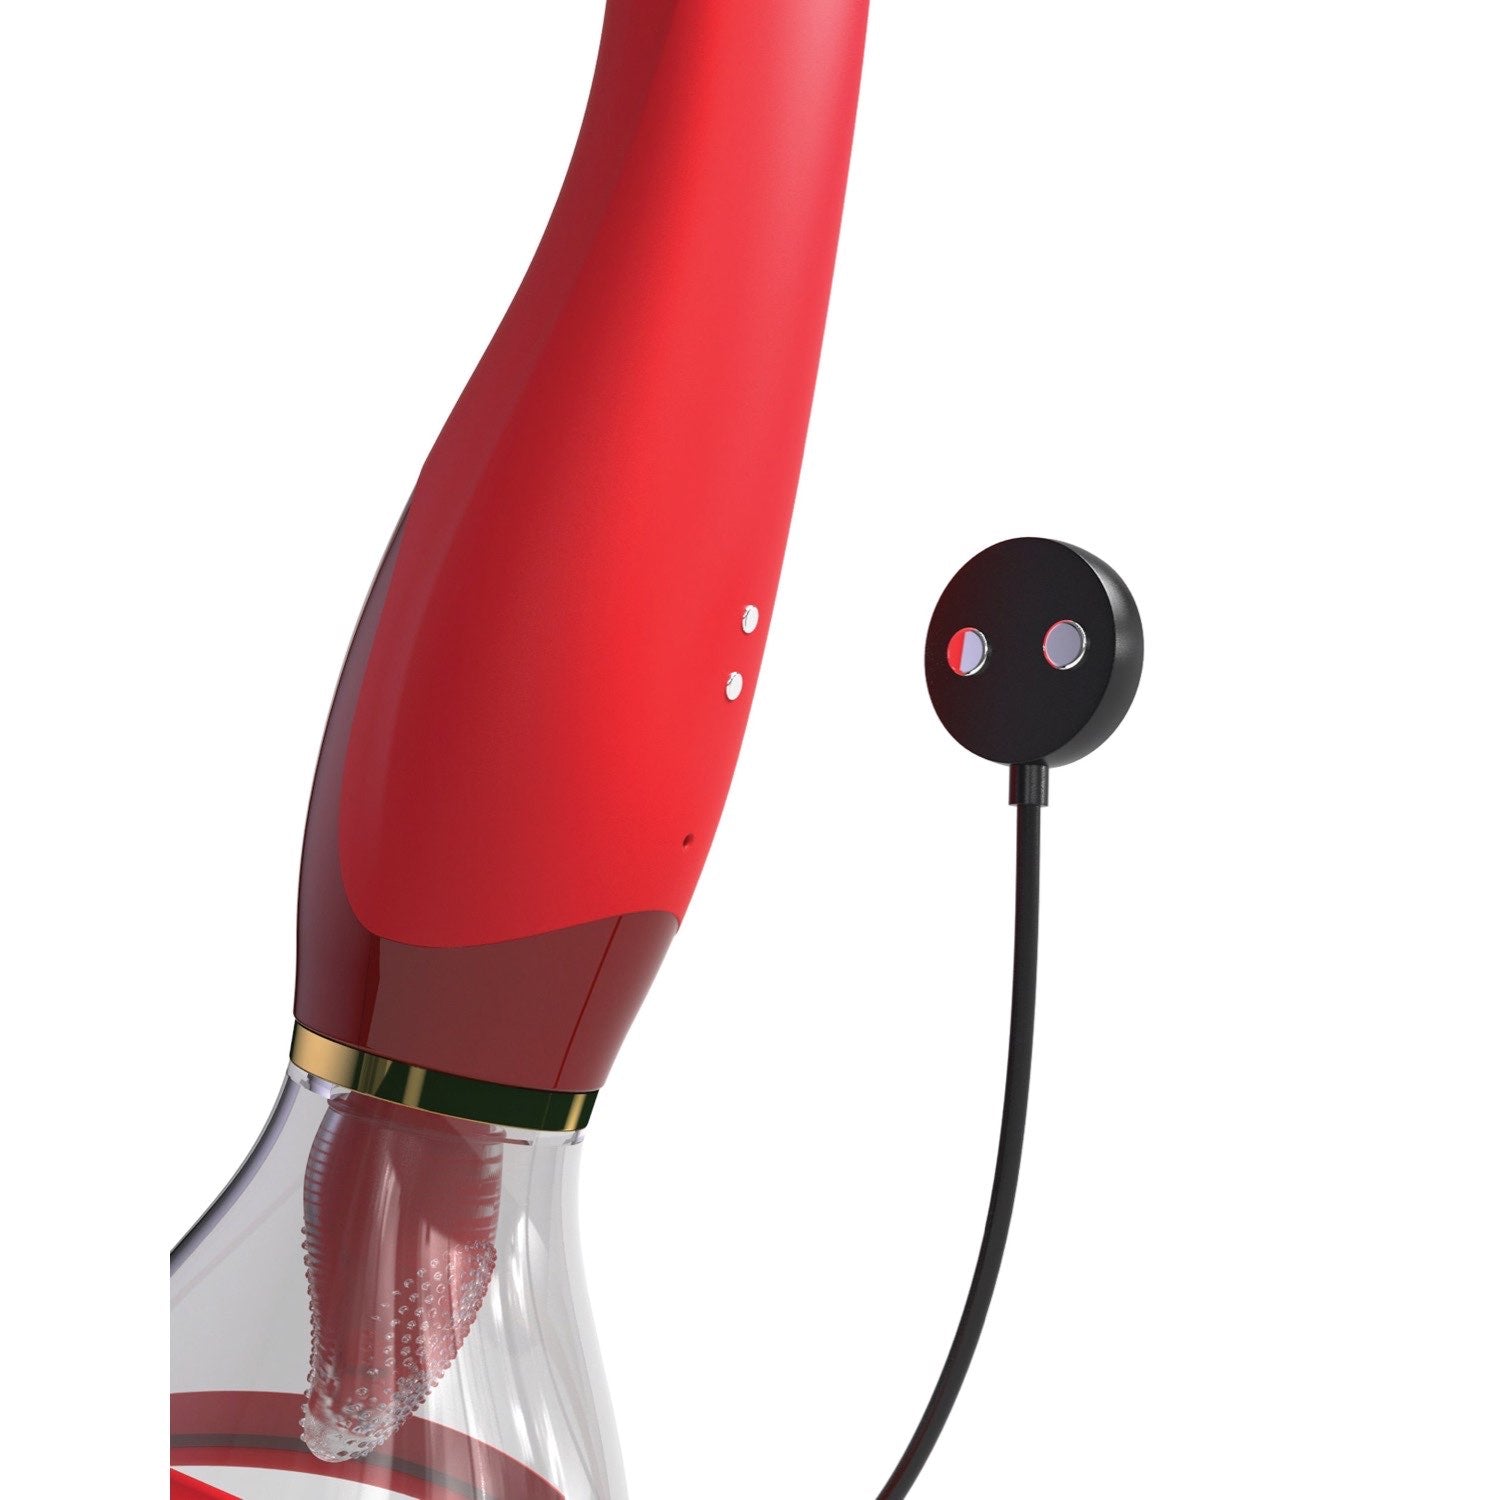 Fantasy For Her Ultimate Pleasure - Red/Gold USB Rechargeable Sucking &amp; Flicking Stimulator by Pipedream